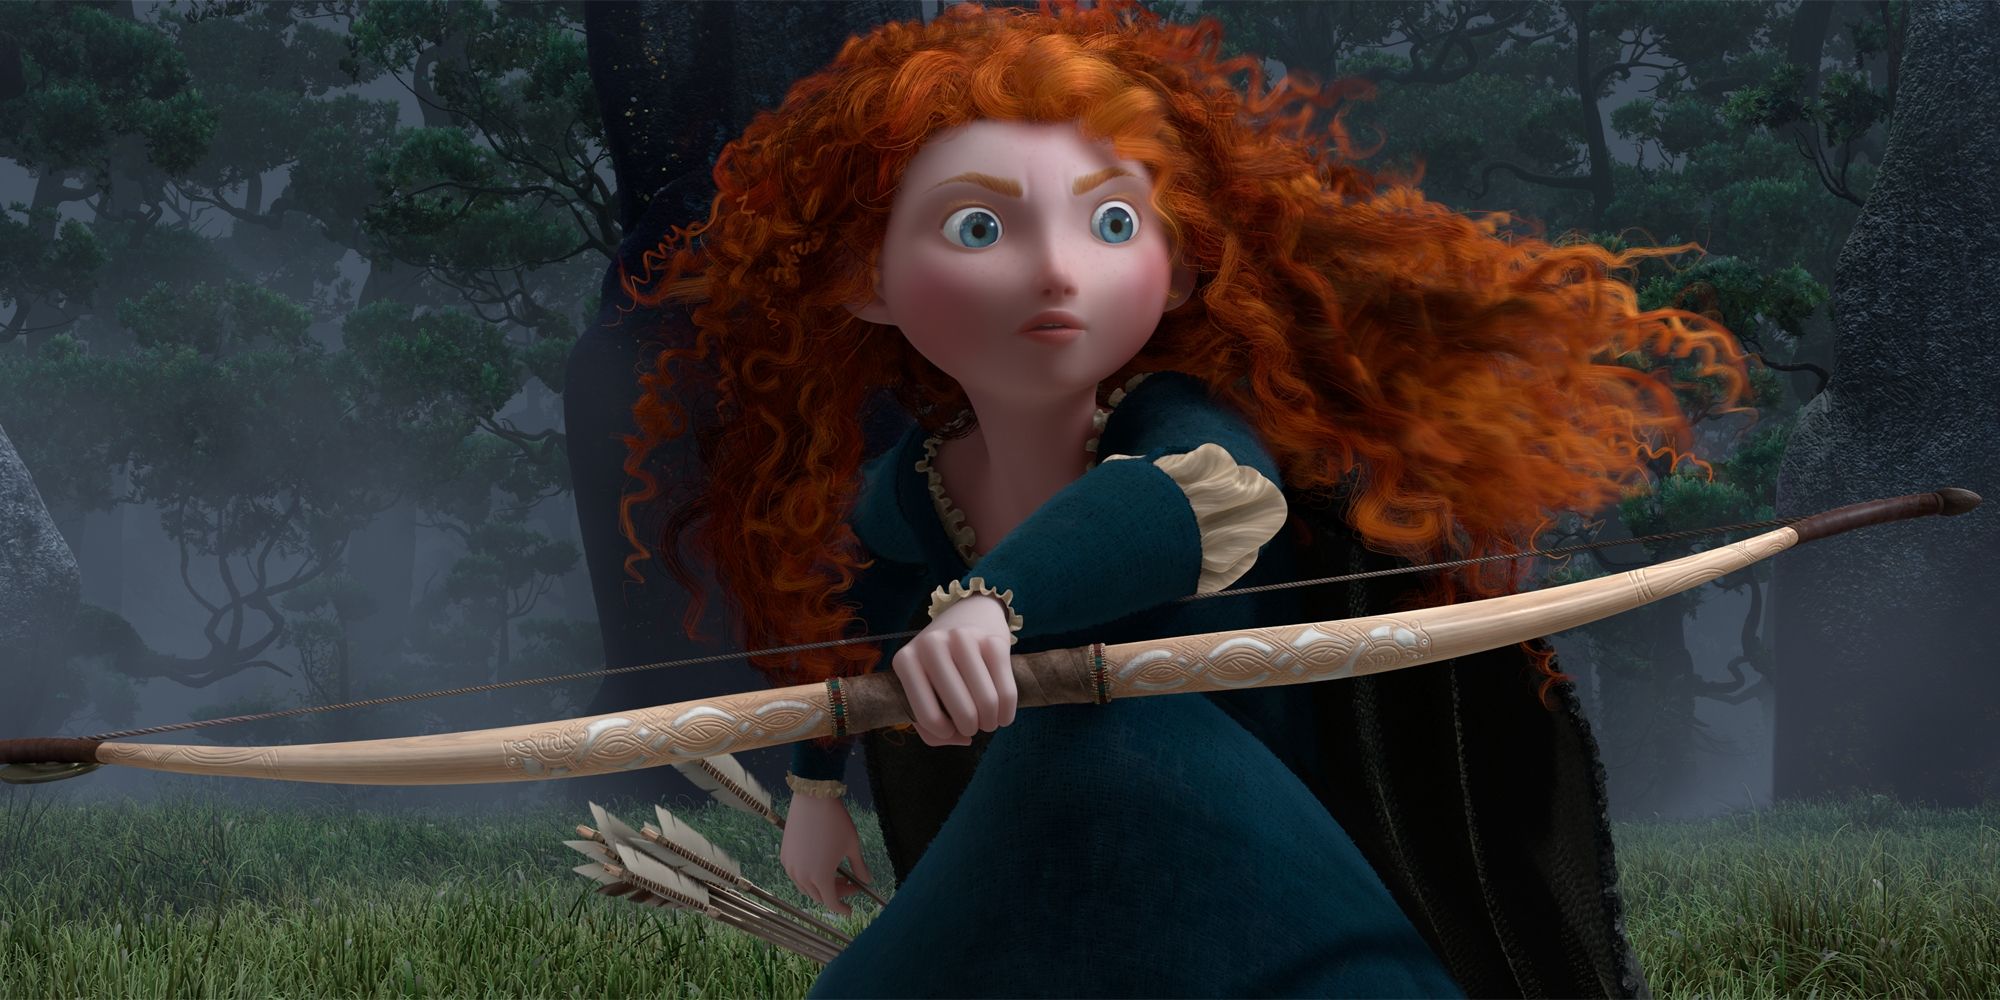 Princess Merida from 'Brave' holding a bow and arrow.